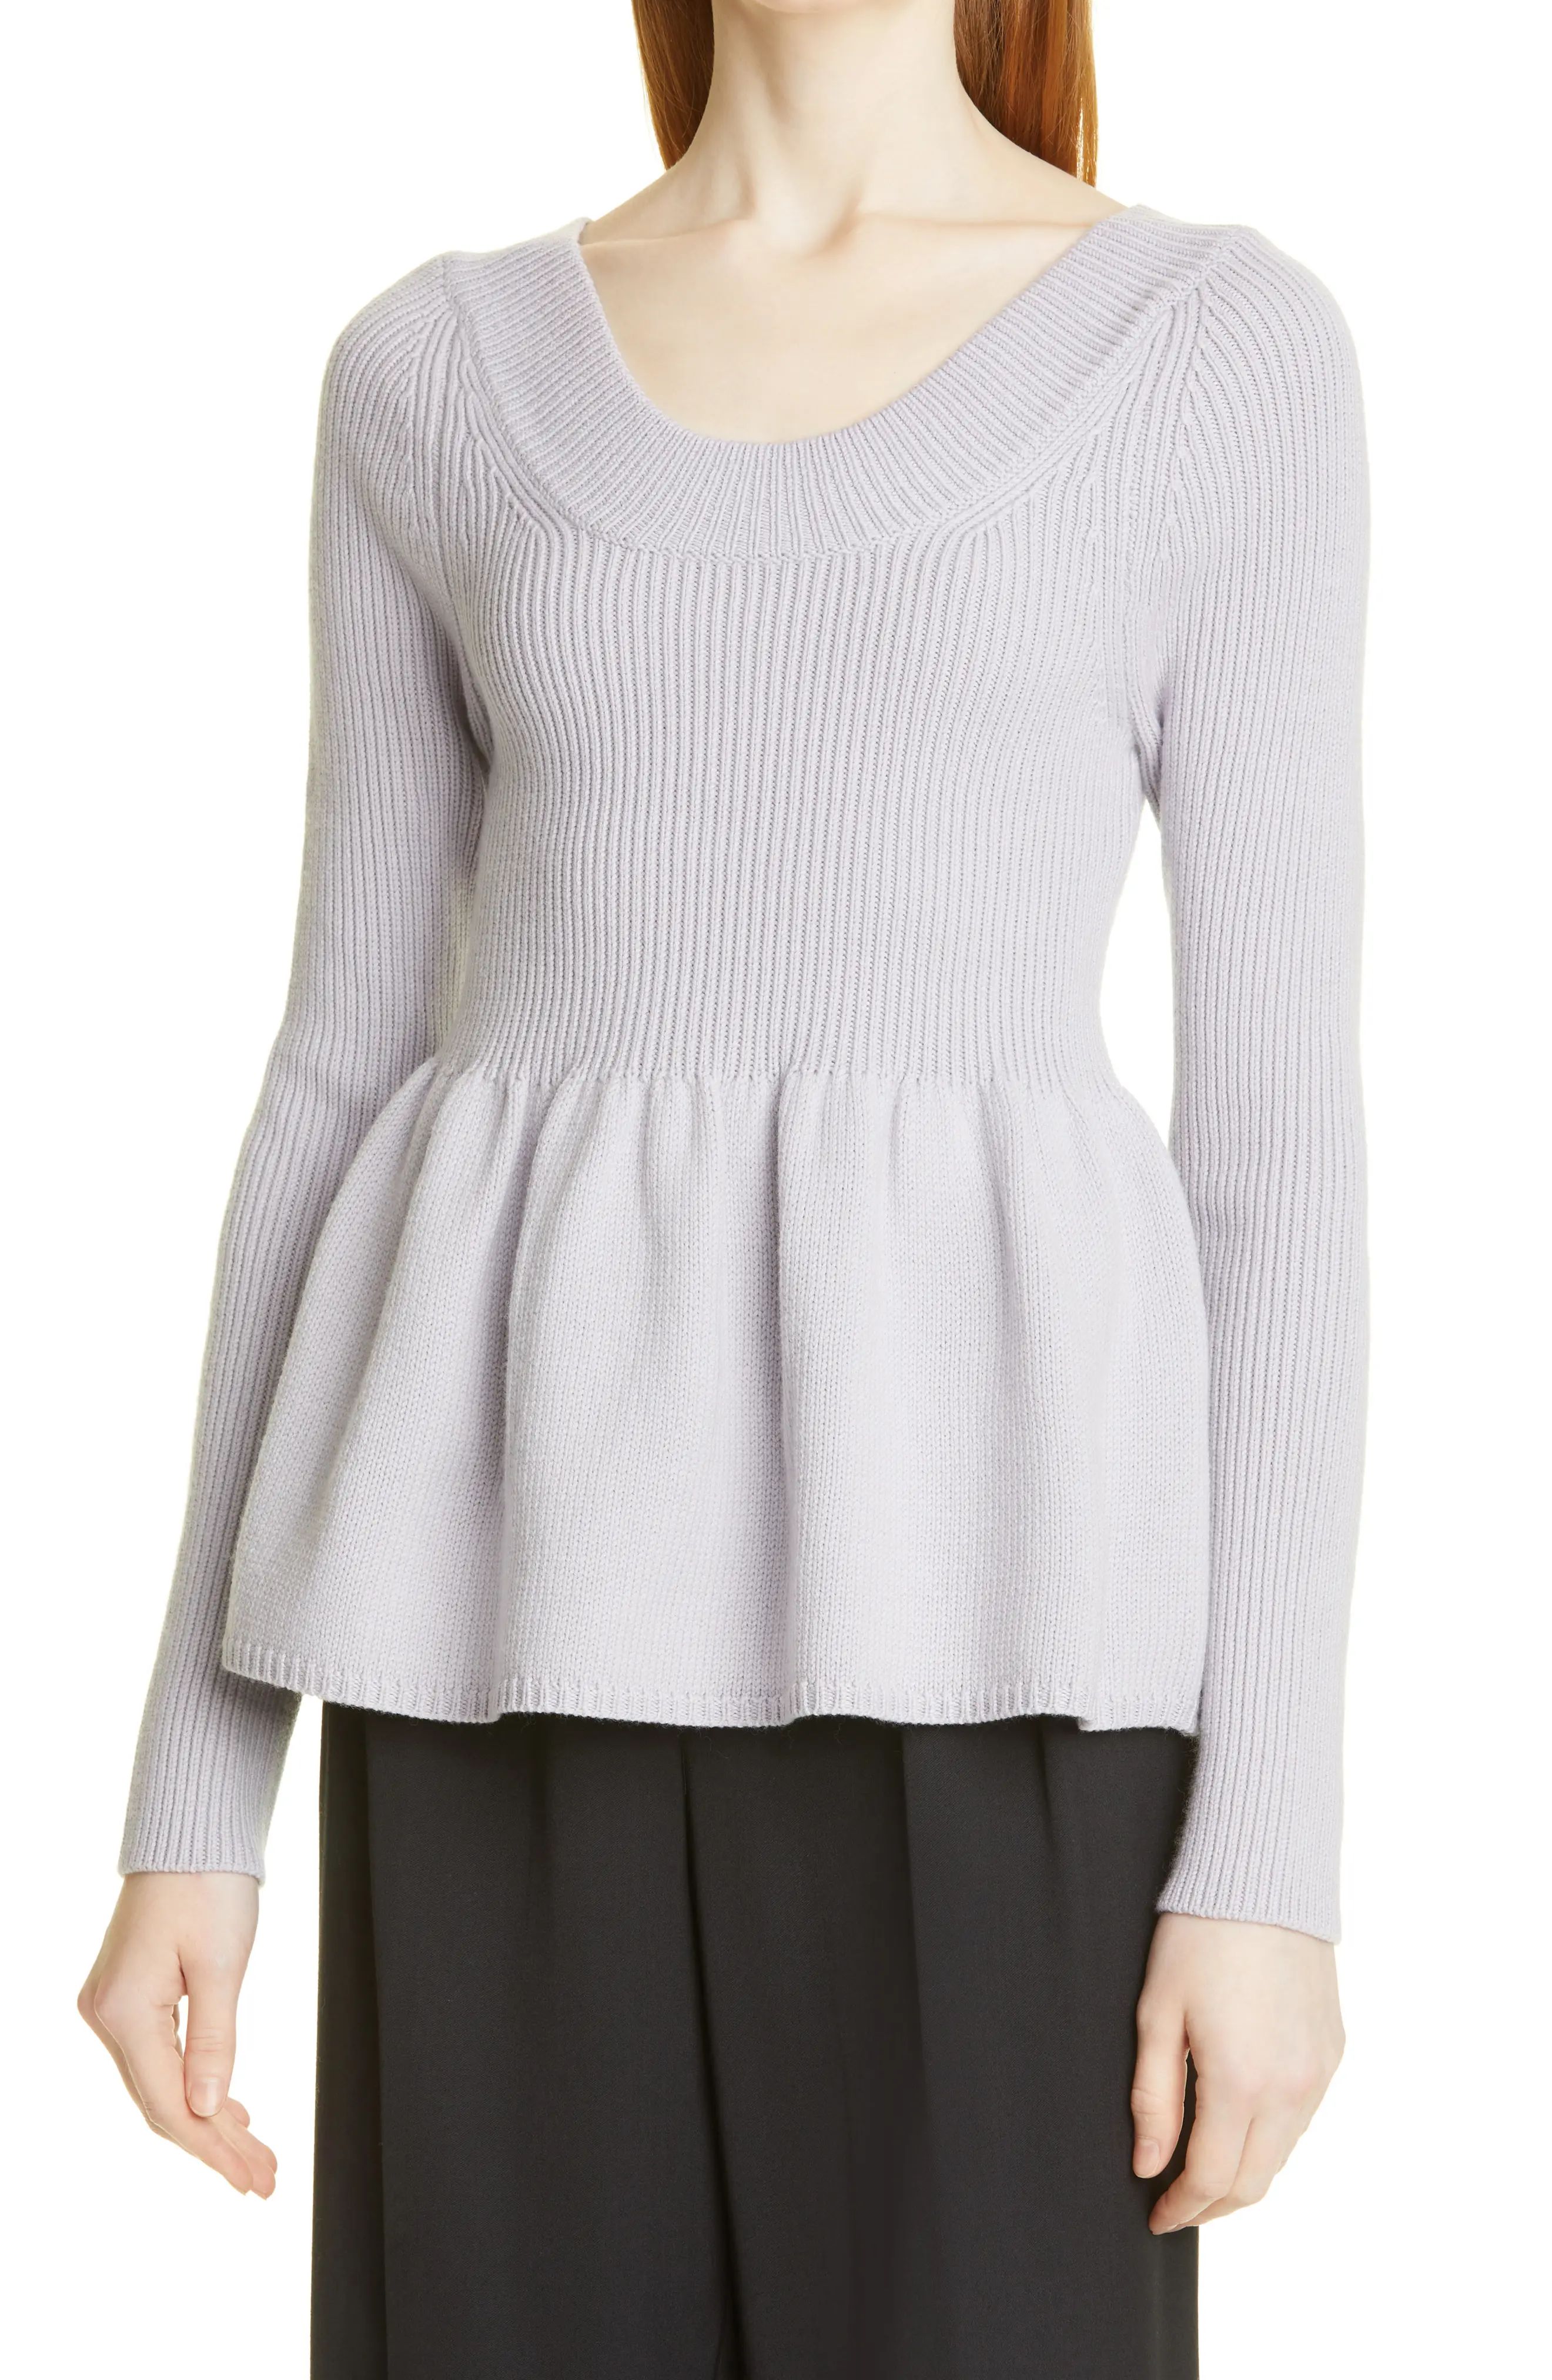 Rebecca Taylor Peplum Top, Size Small in Pale Lilac at Nordstrom | Nordstrom